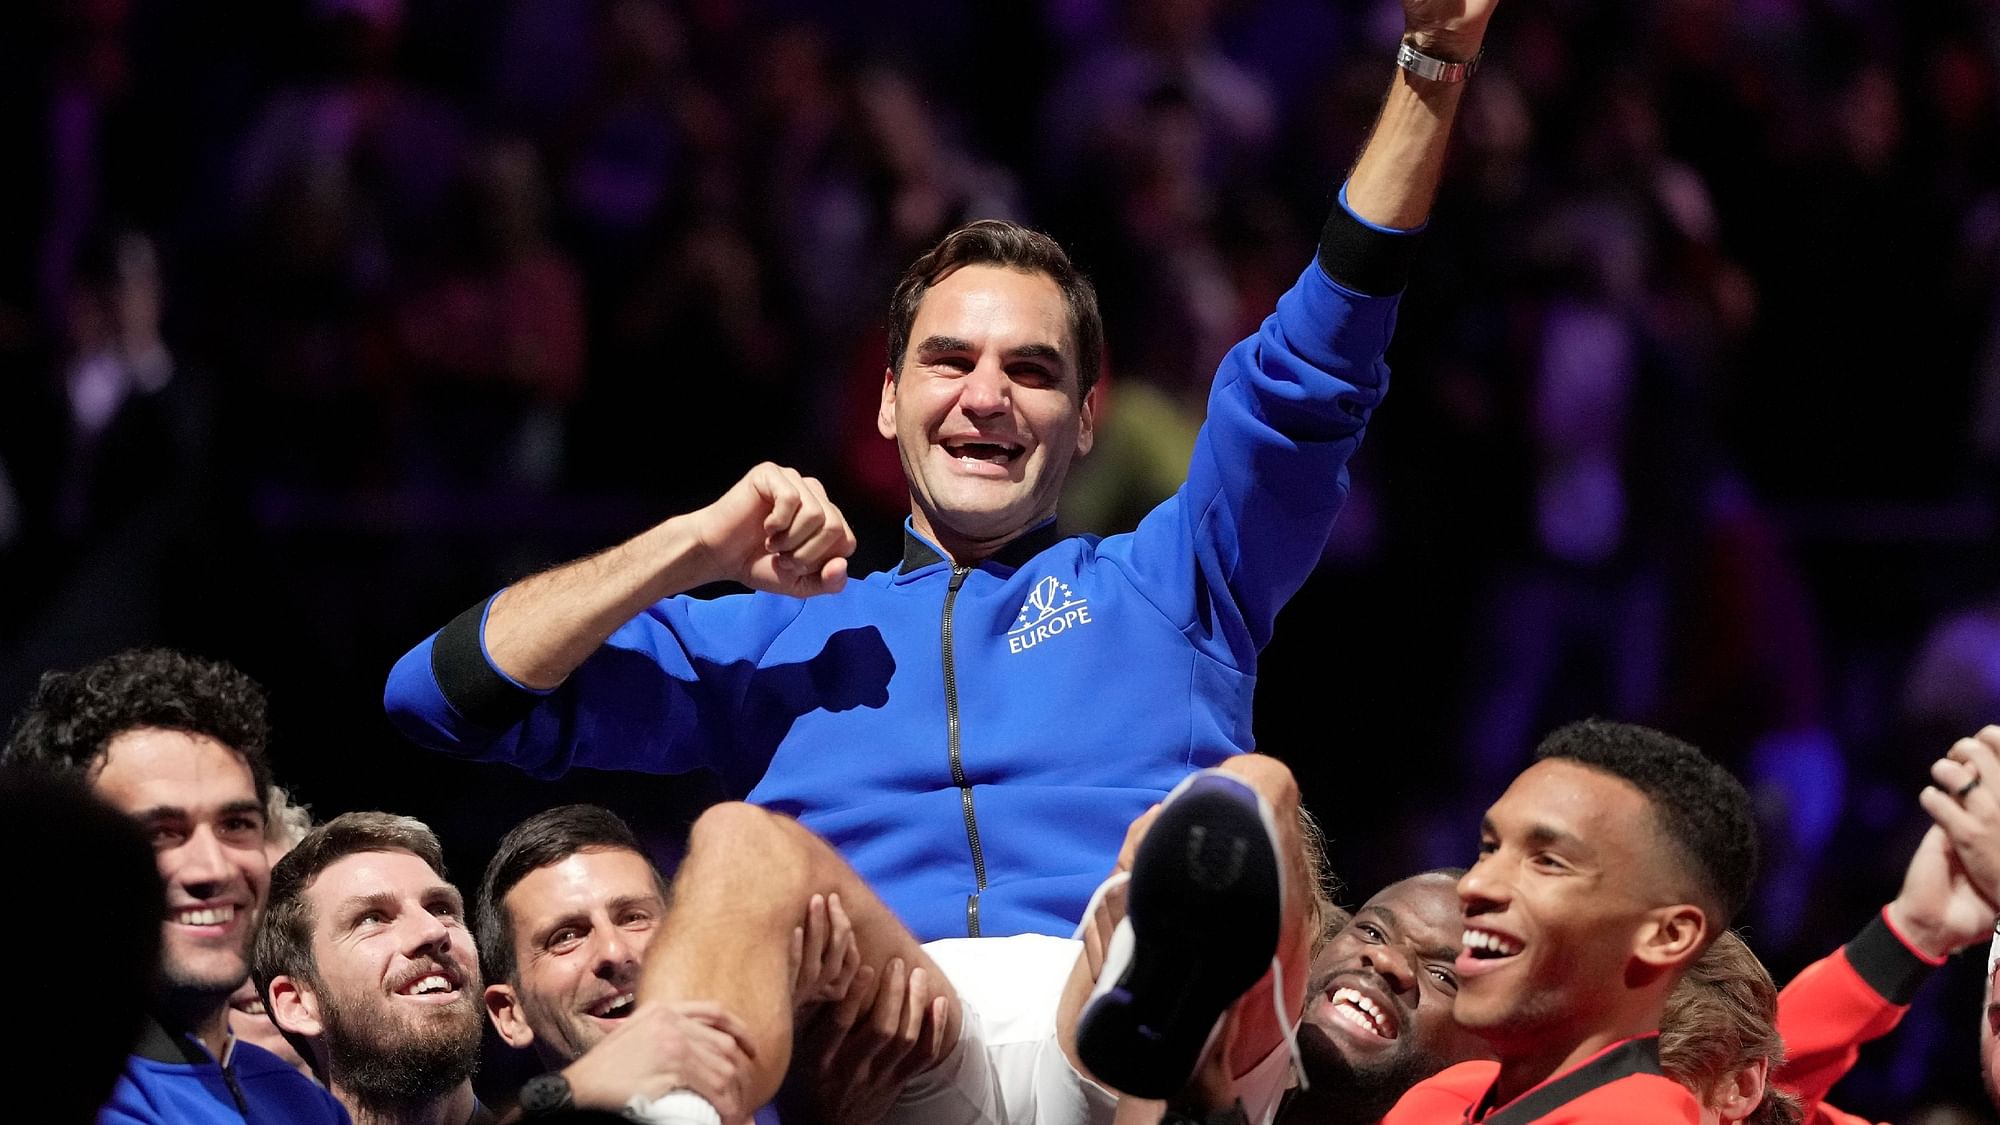 <div class="paragraphs"><p>Laver Cup: Team Europe's Roger Federer is lifted by fellow players after playing the last match of his career before retirement.</p></div>